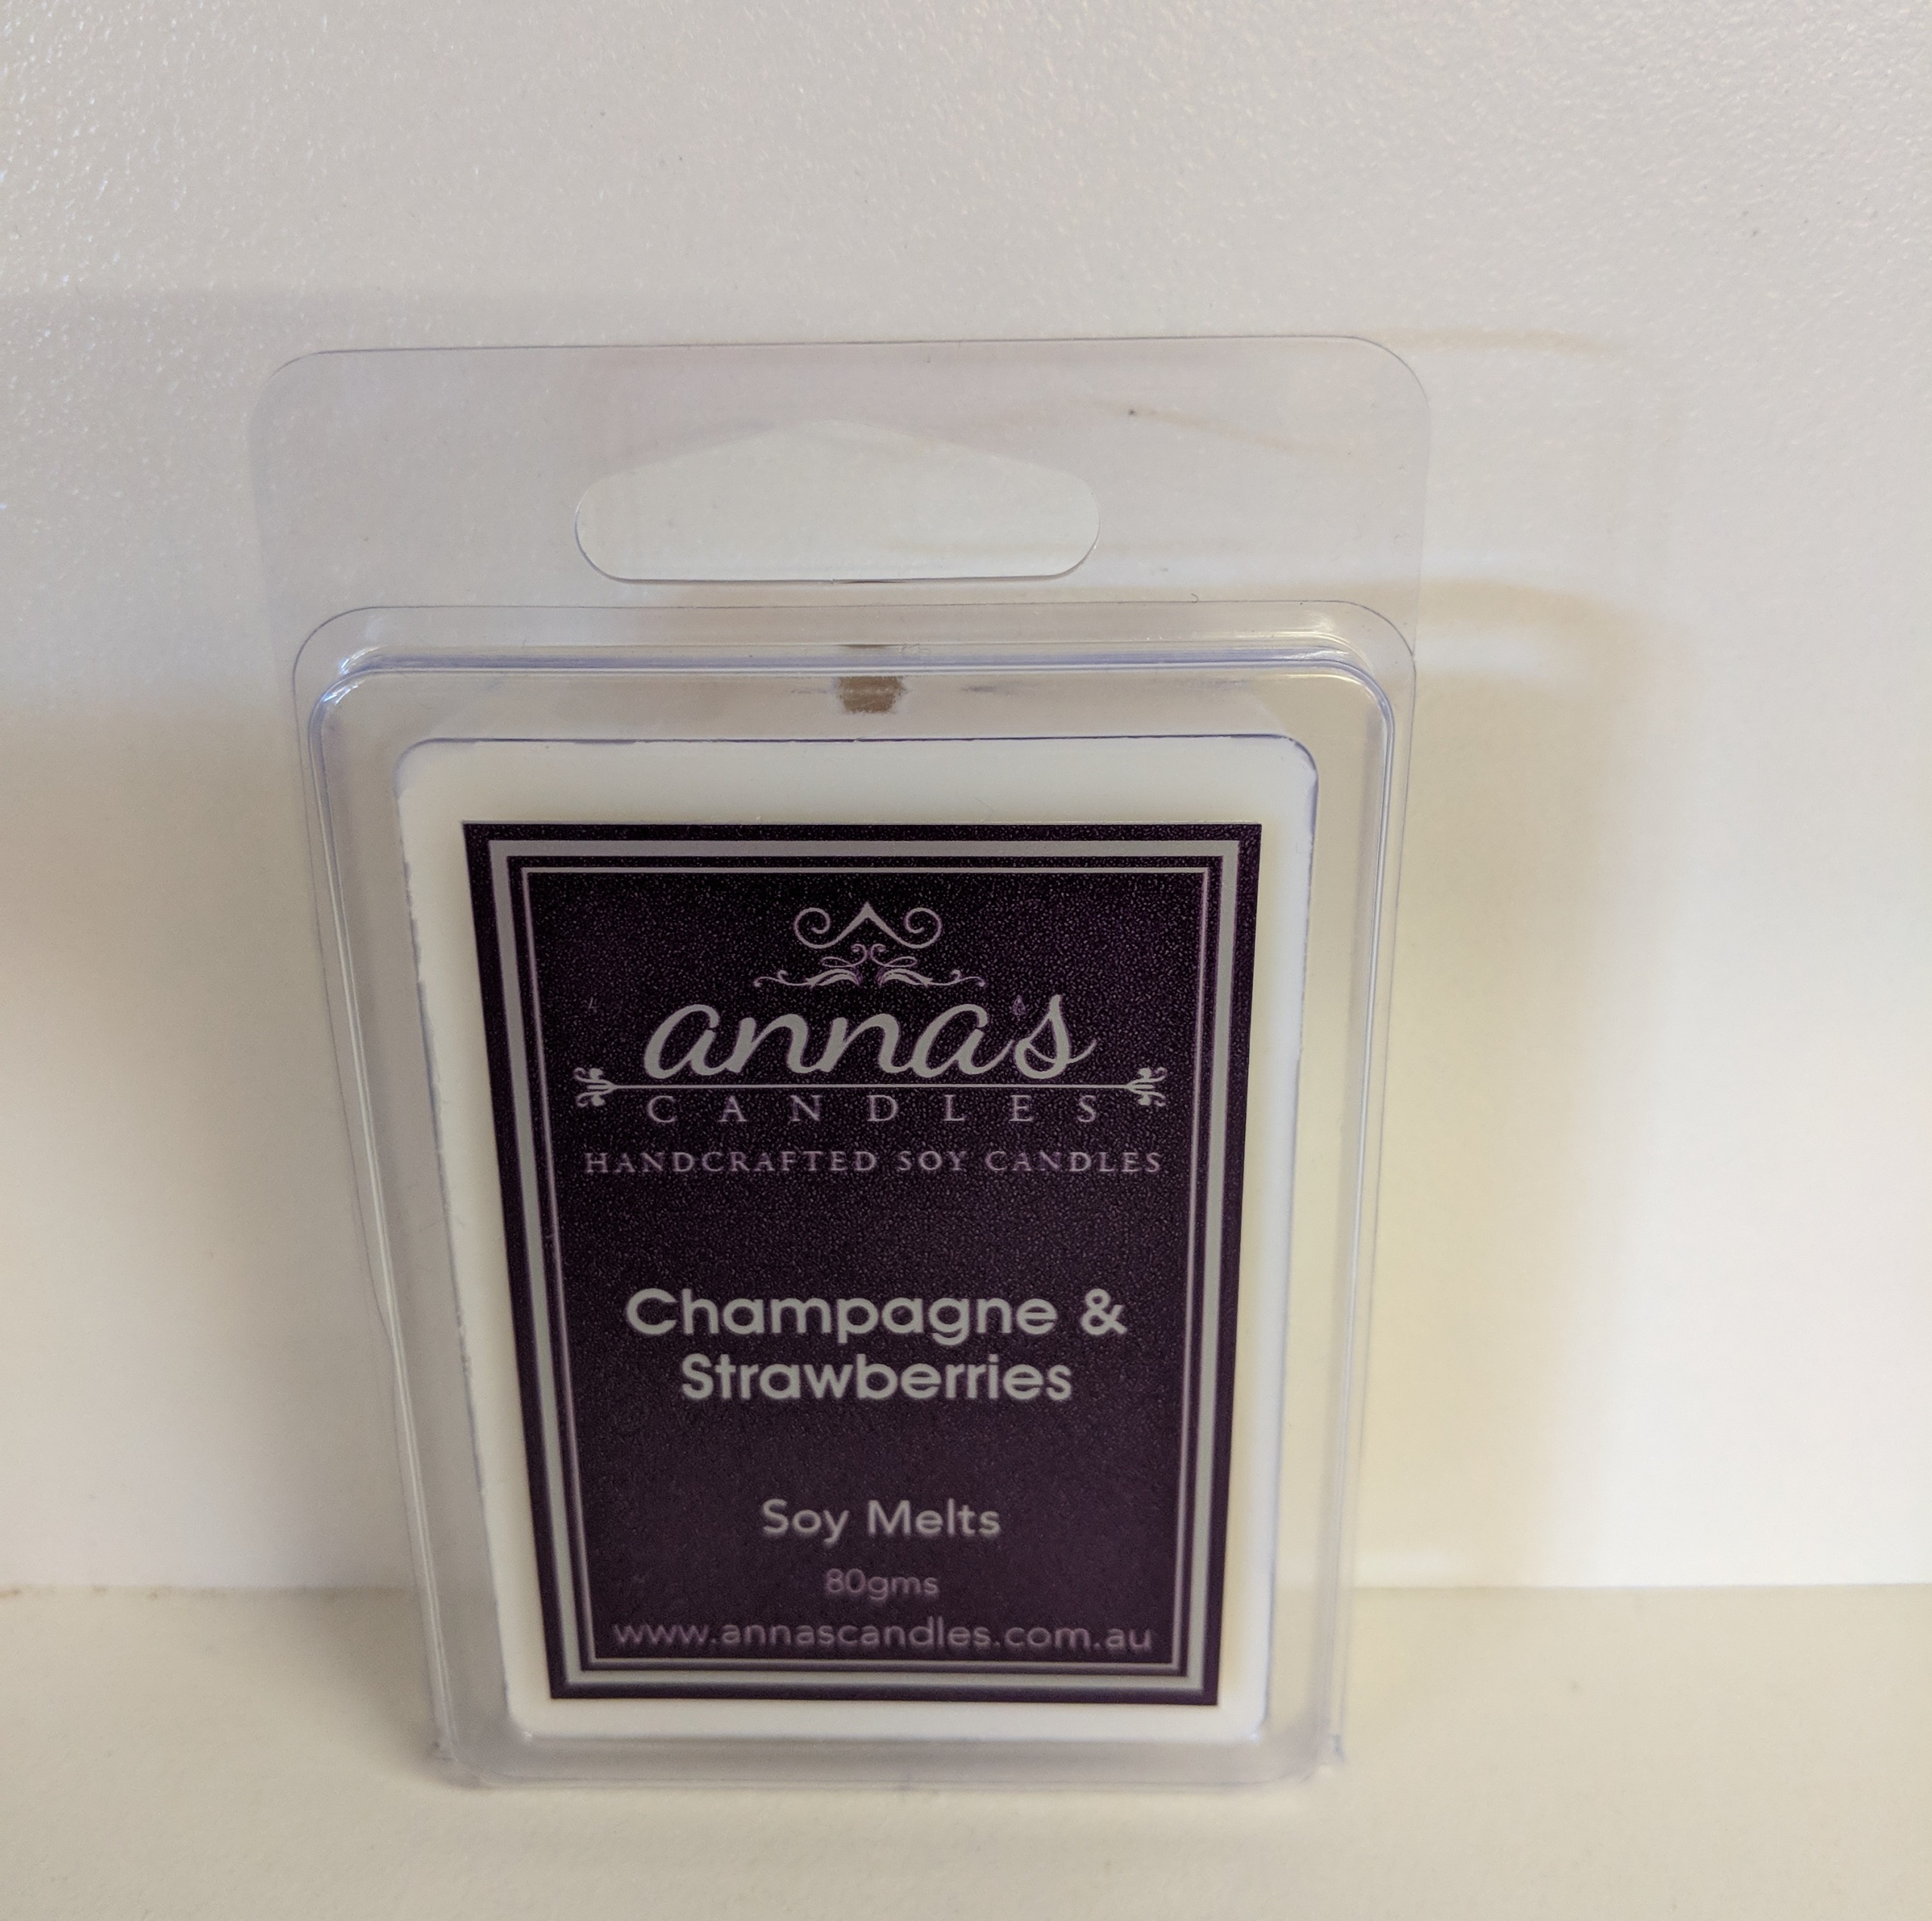 Champagne and Strawberries soy wax melt packs